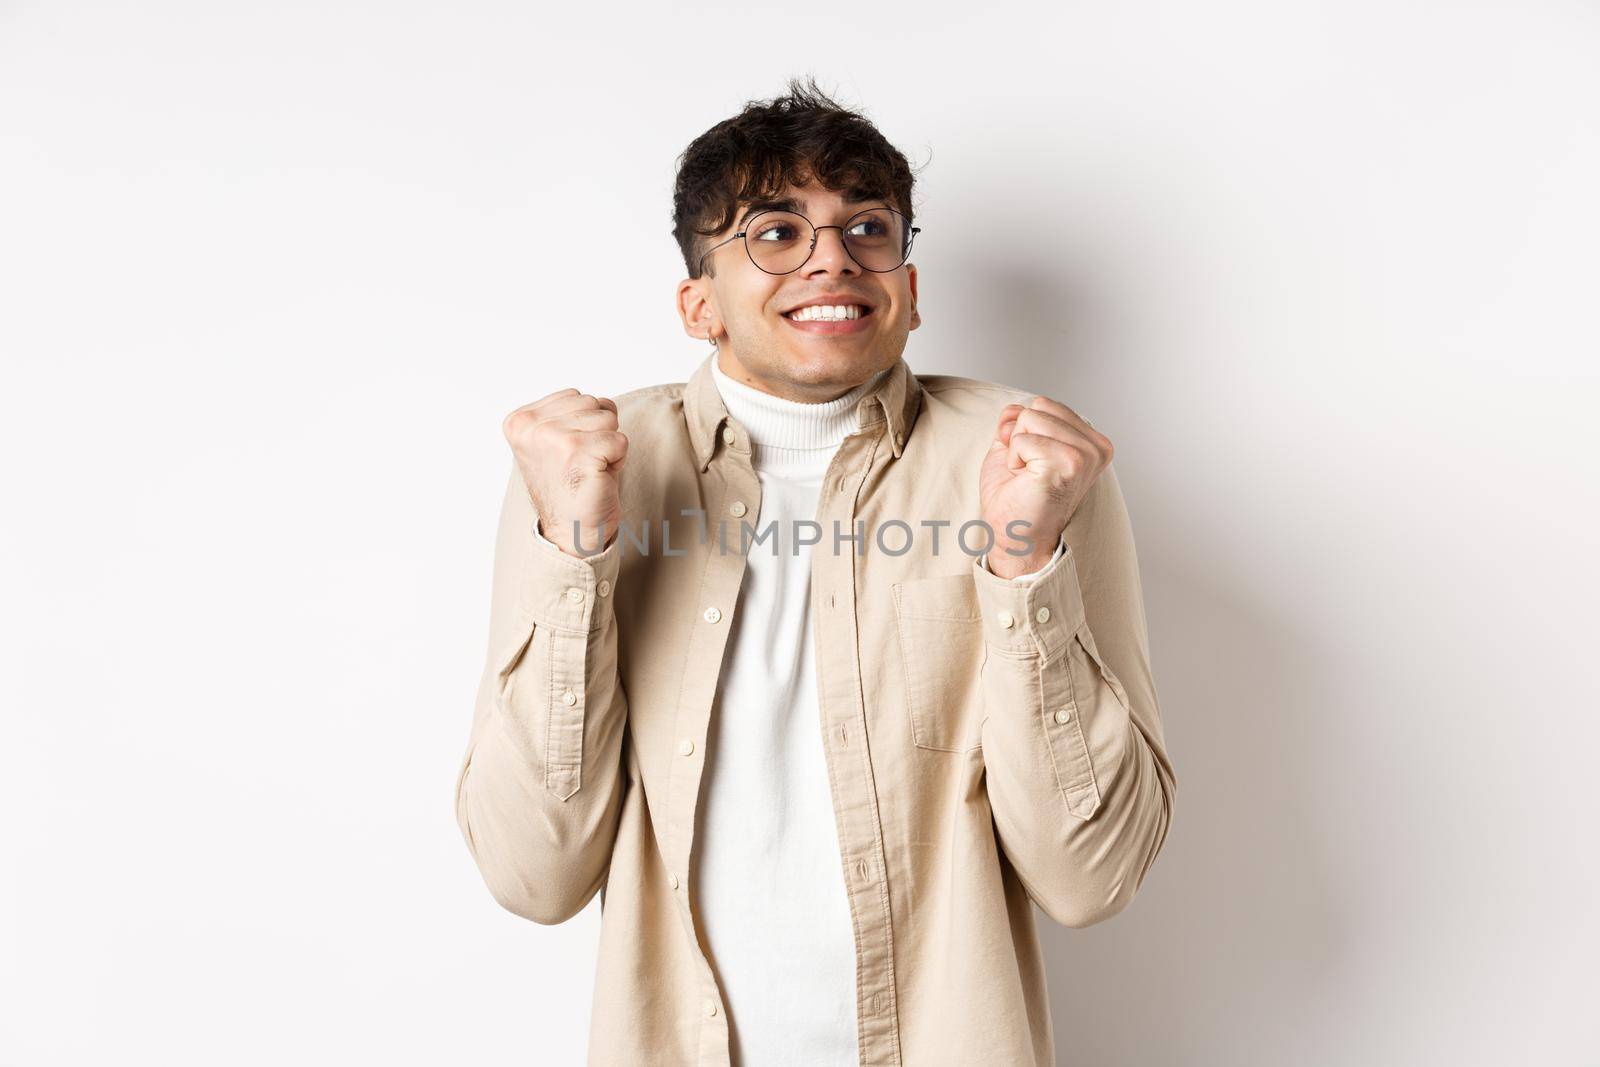 Image of handsome excited man feeling motivated and lucky, looking right and smiling, making fist pump gesture to celebrate victory, winning prize, standing on white background.